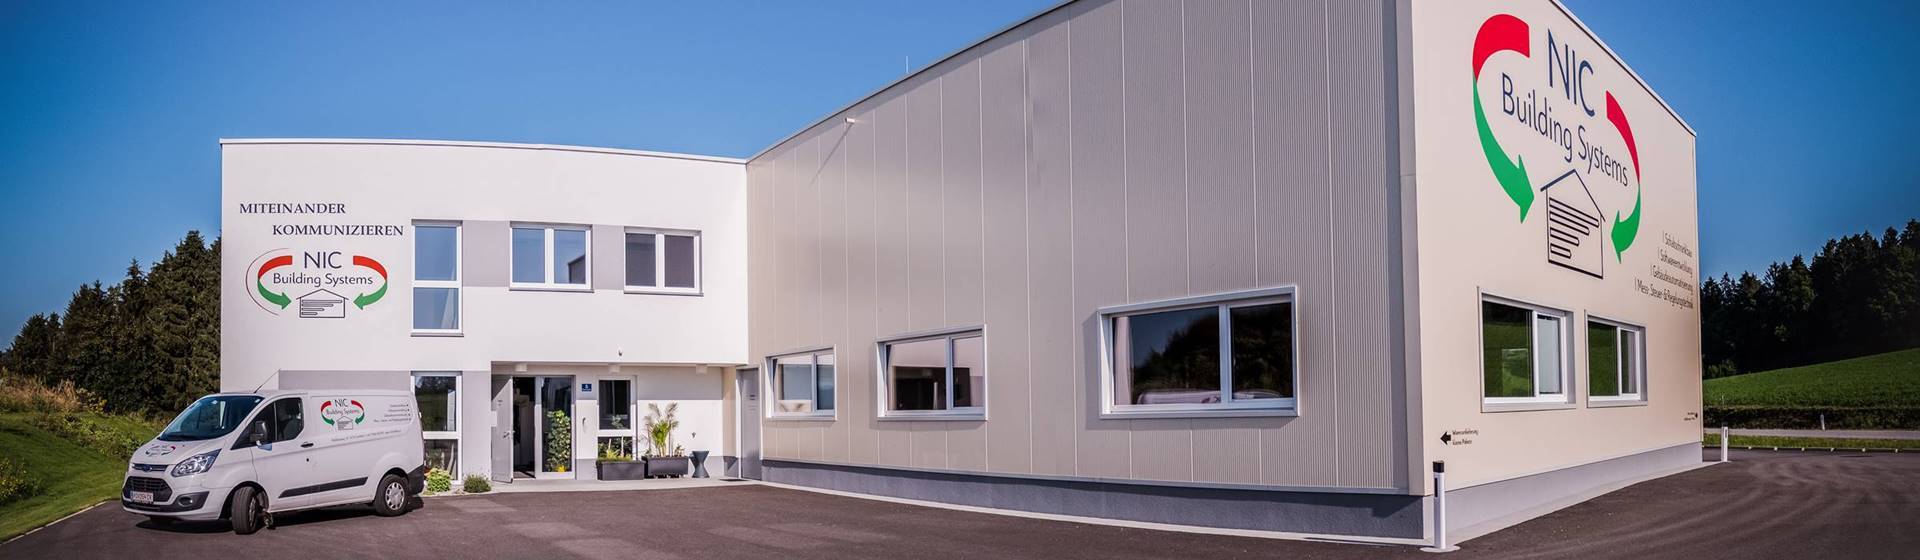 NIC Building Systems GmbH